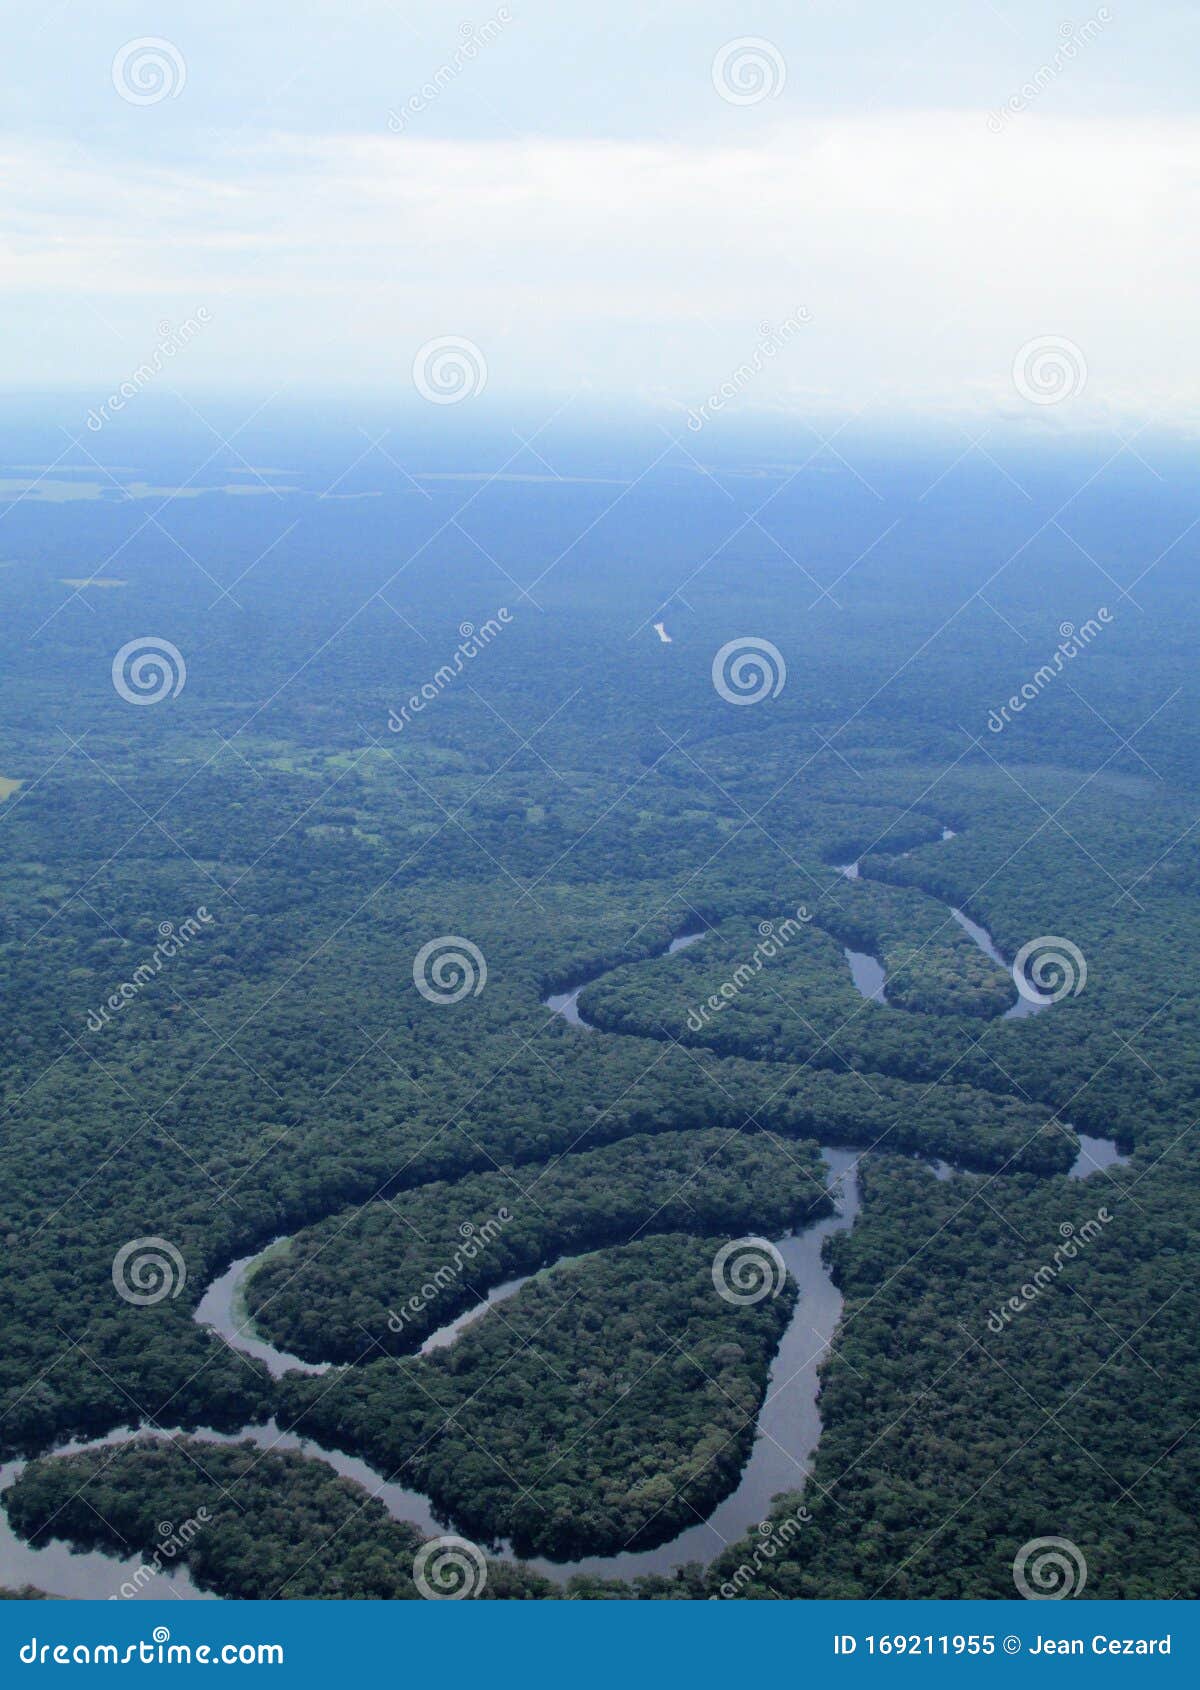 a river meanders in the congo jungle, kasaÃÂ¯